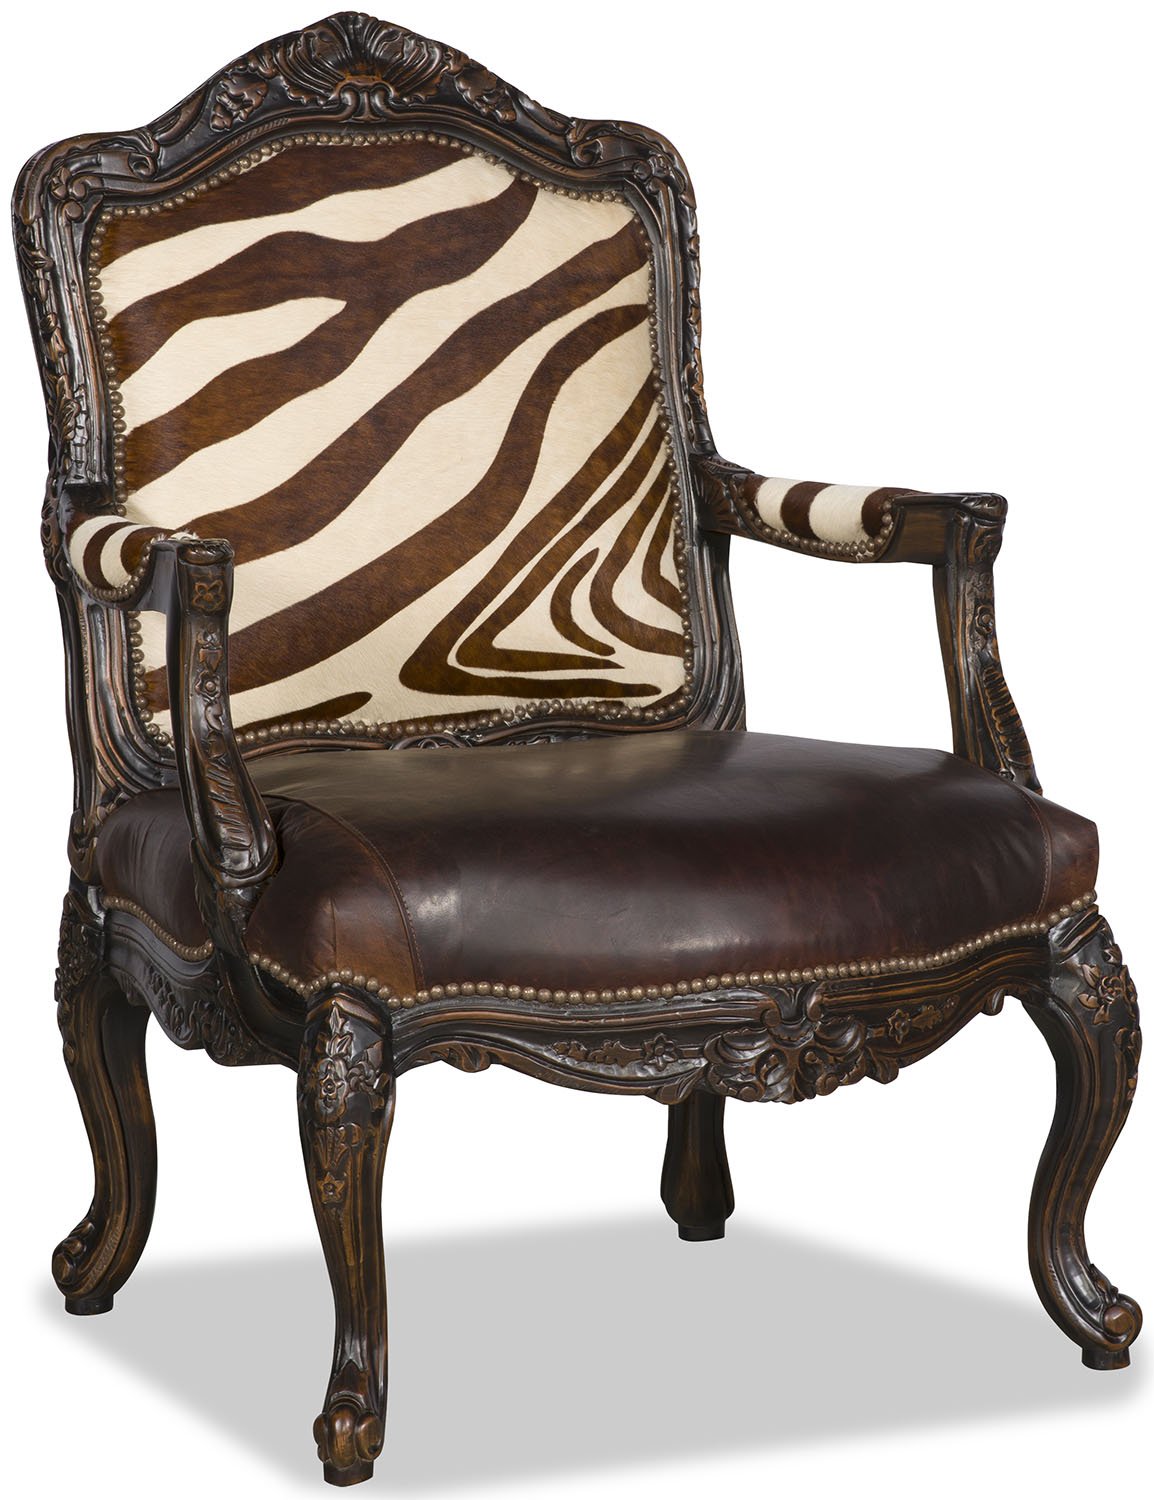 Millie Chocolate Leather and Zebra Chair